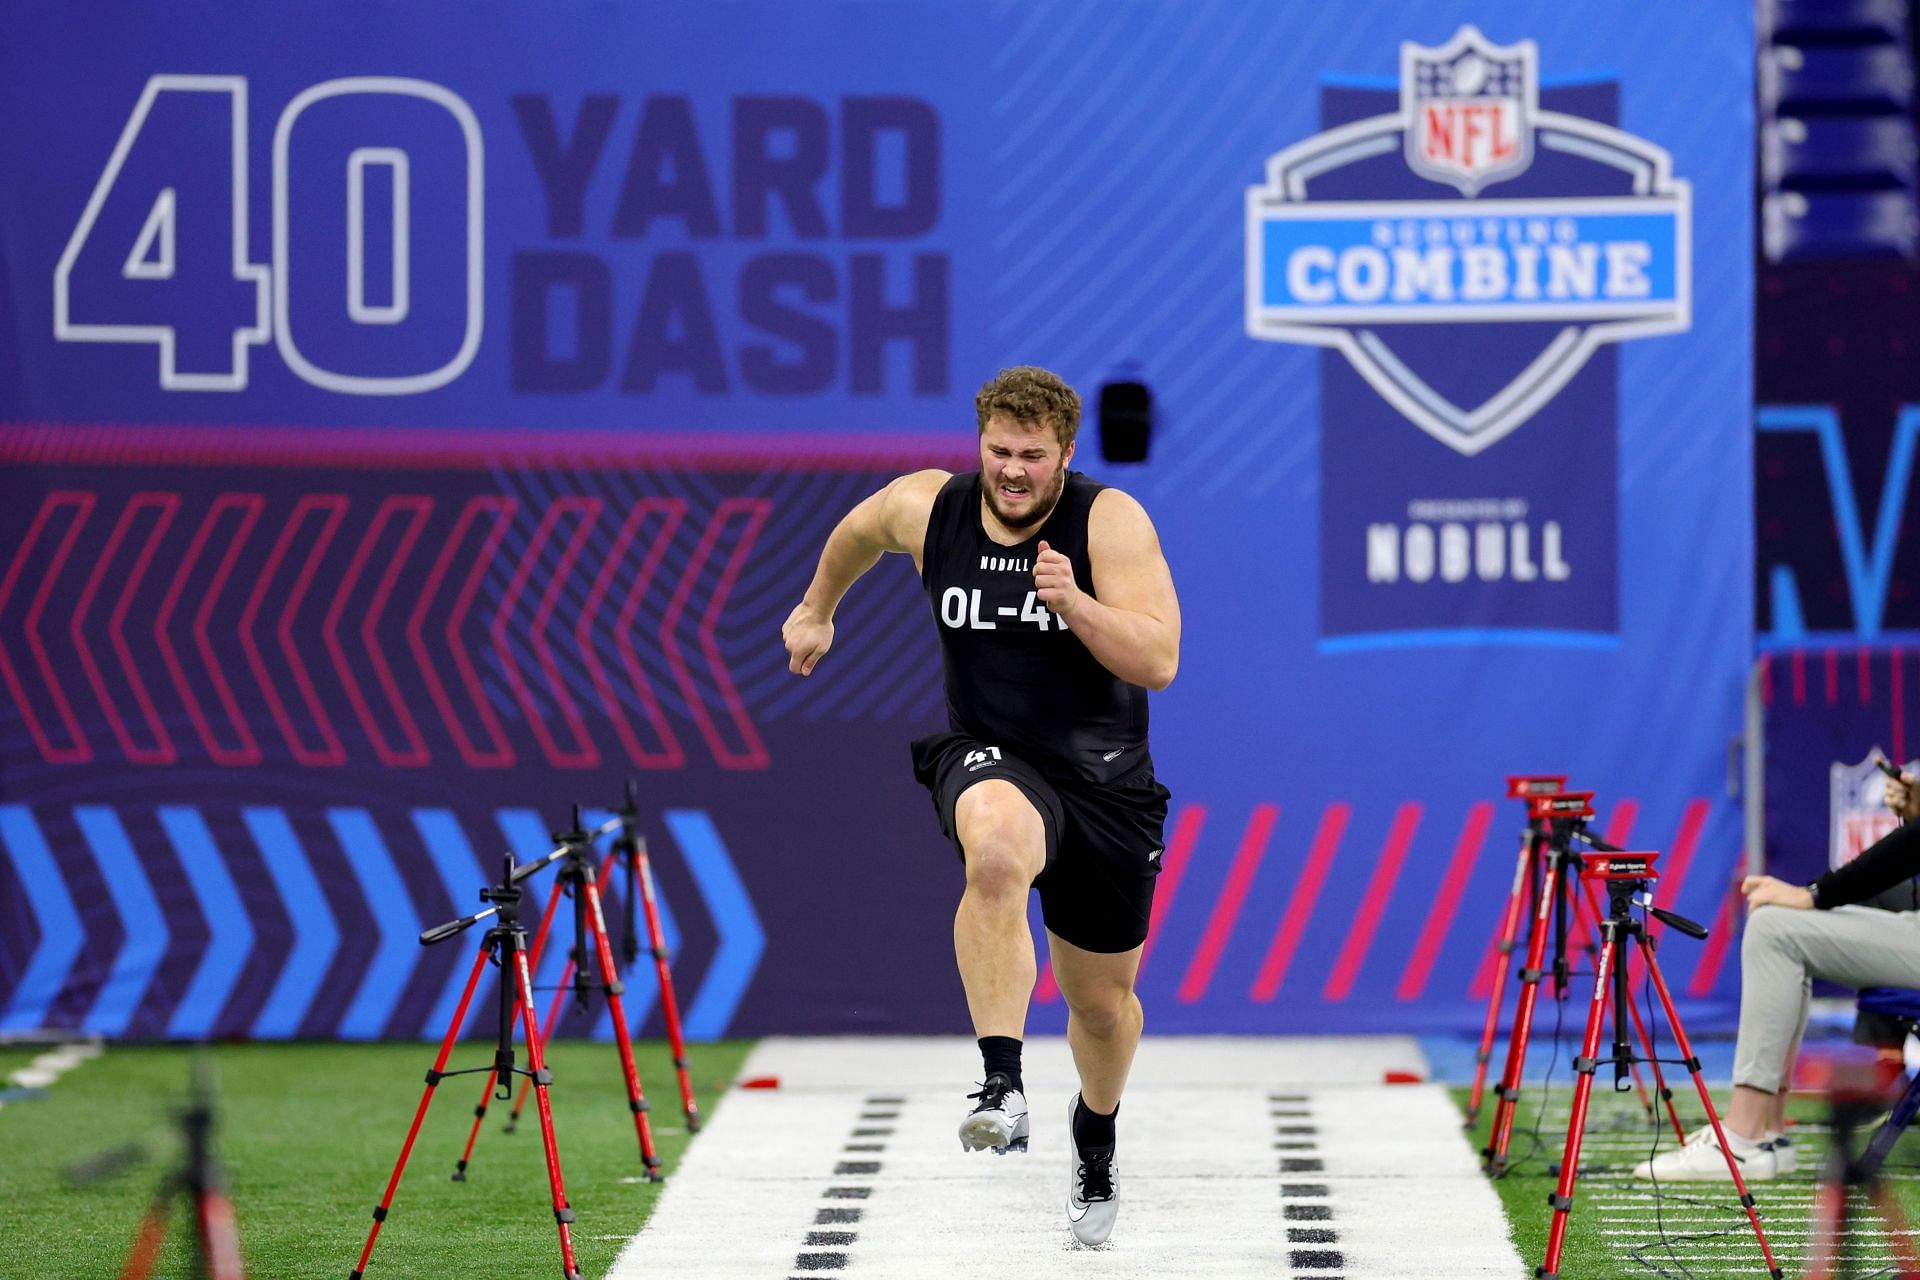 Peter Skoronski of Northwestern participates in the 40-yard dash during the NFL Combine